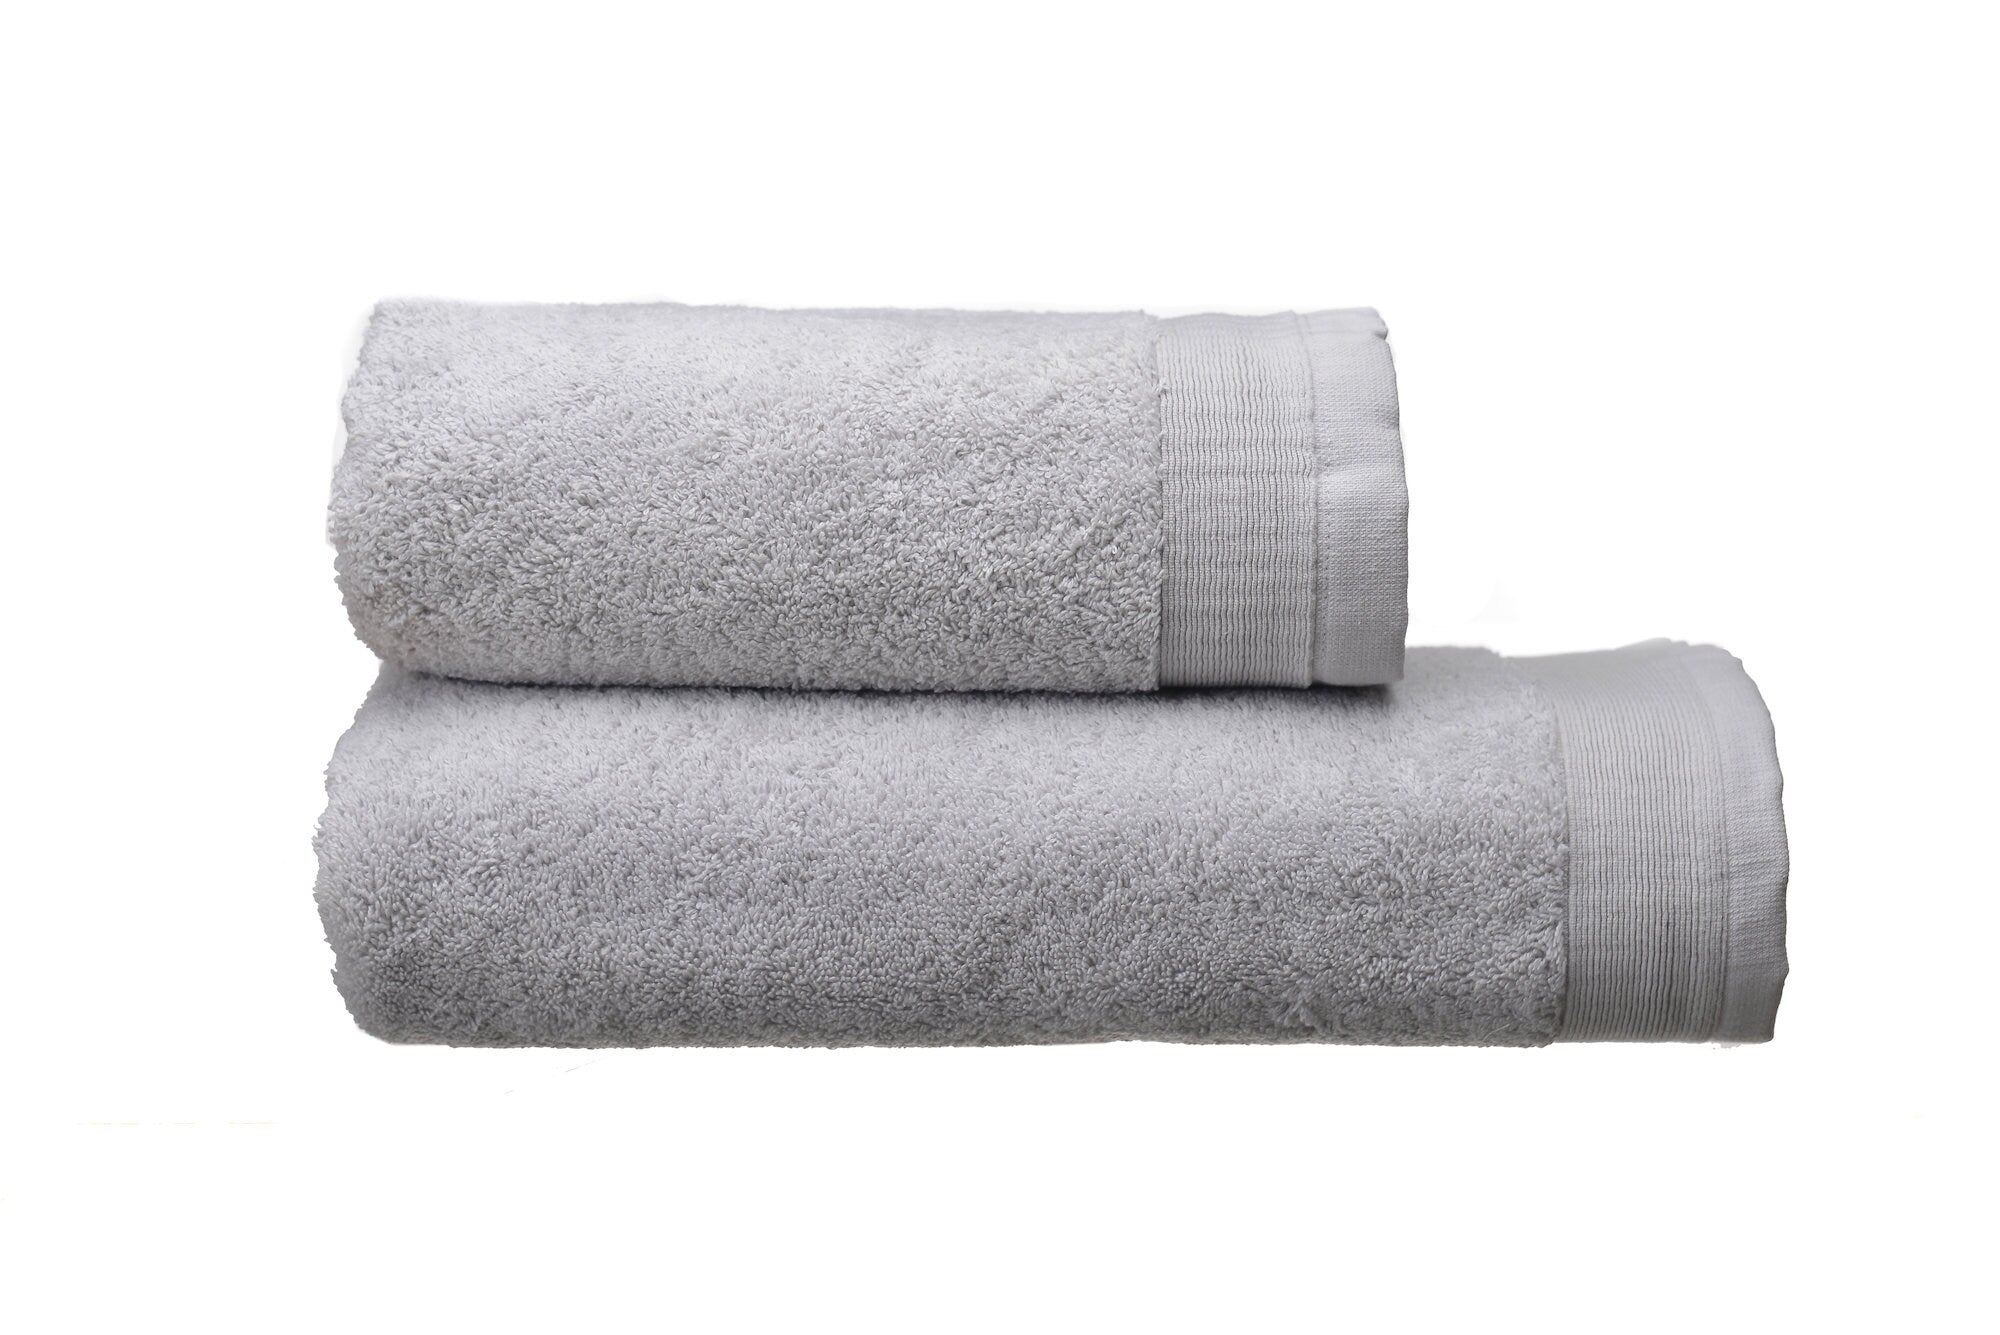 Bath Towel Set: 1 Bath and 1 Face Towel, 100% Natural Terry Cotton, Soft Touch, Super Absorbent